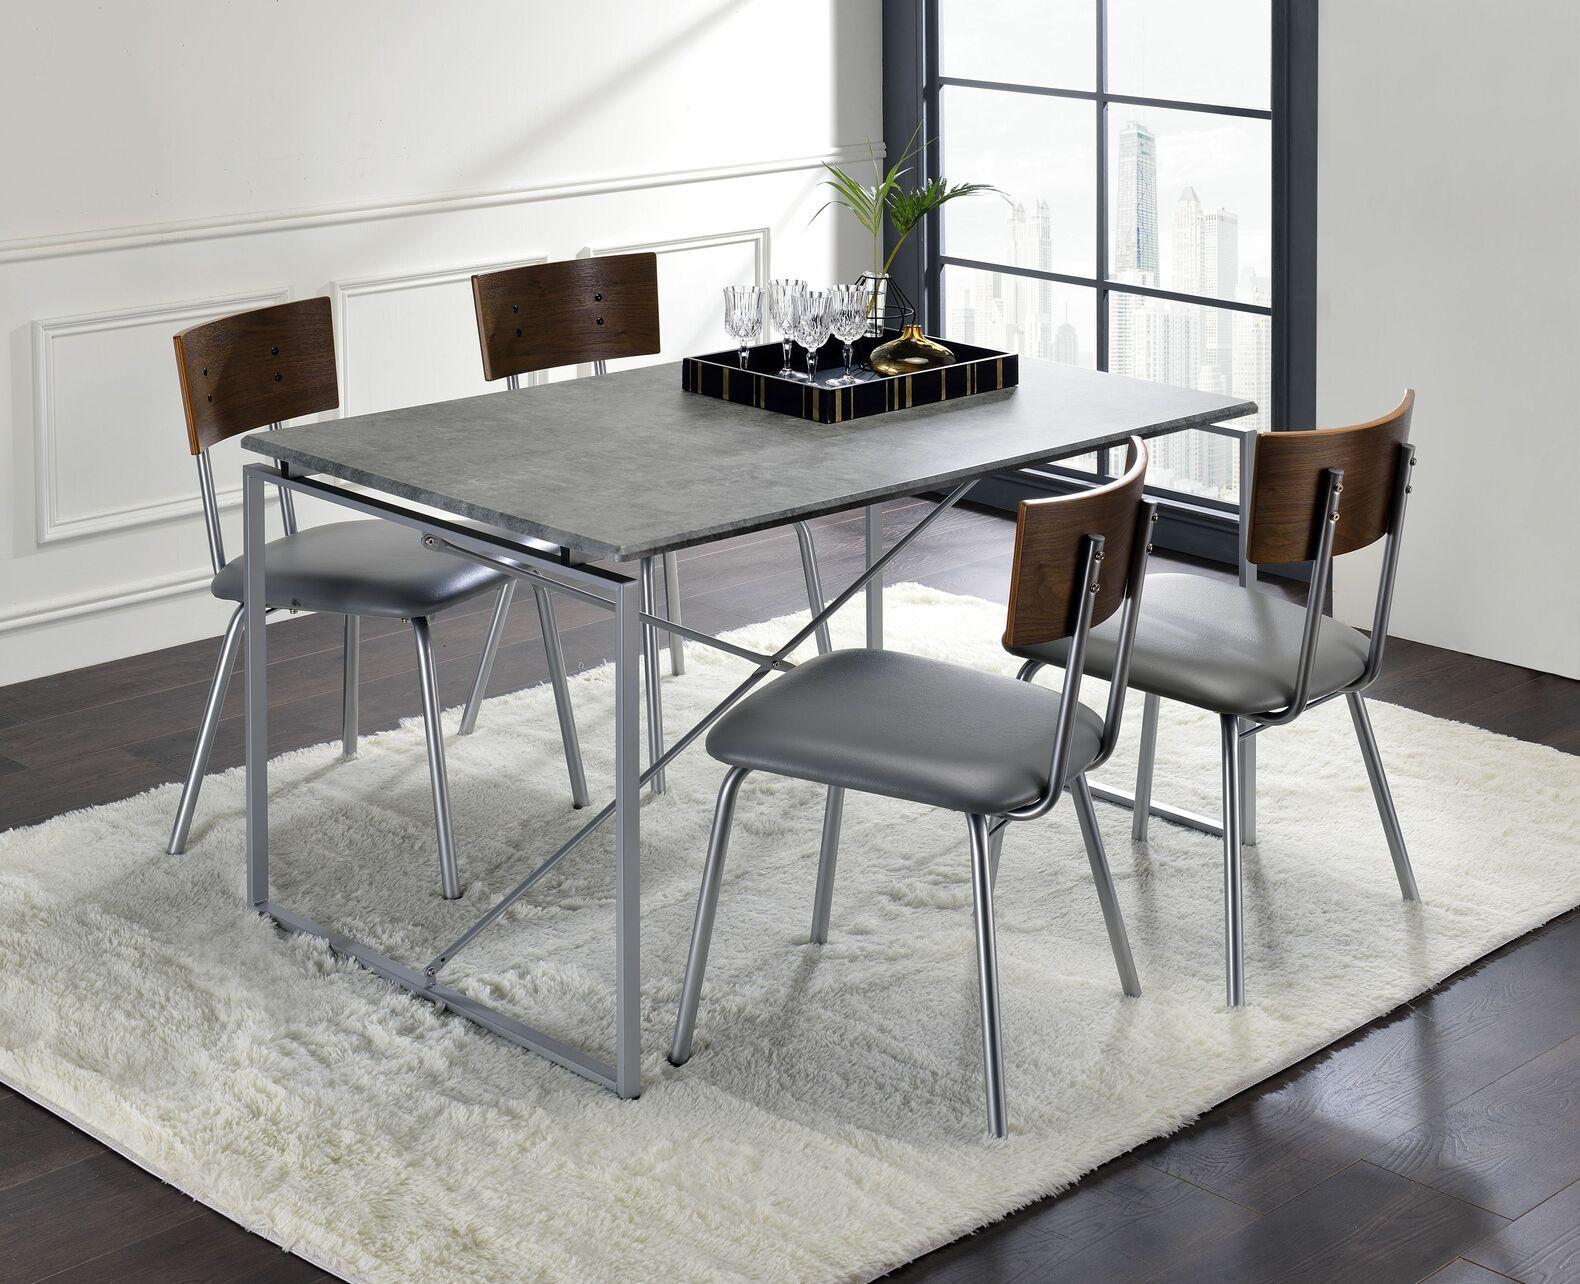 

    
Transitional Faux Concrete & Silver Dining Table + 6x Chairs by Acme Jurgen 72905-7pcs
